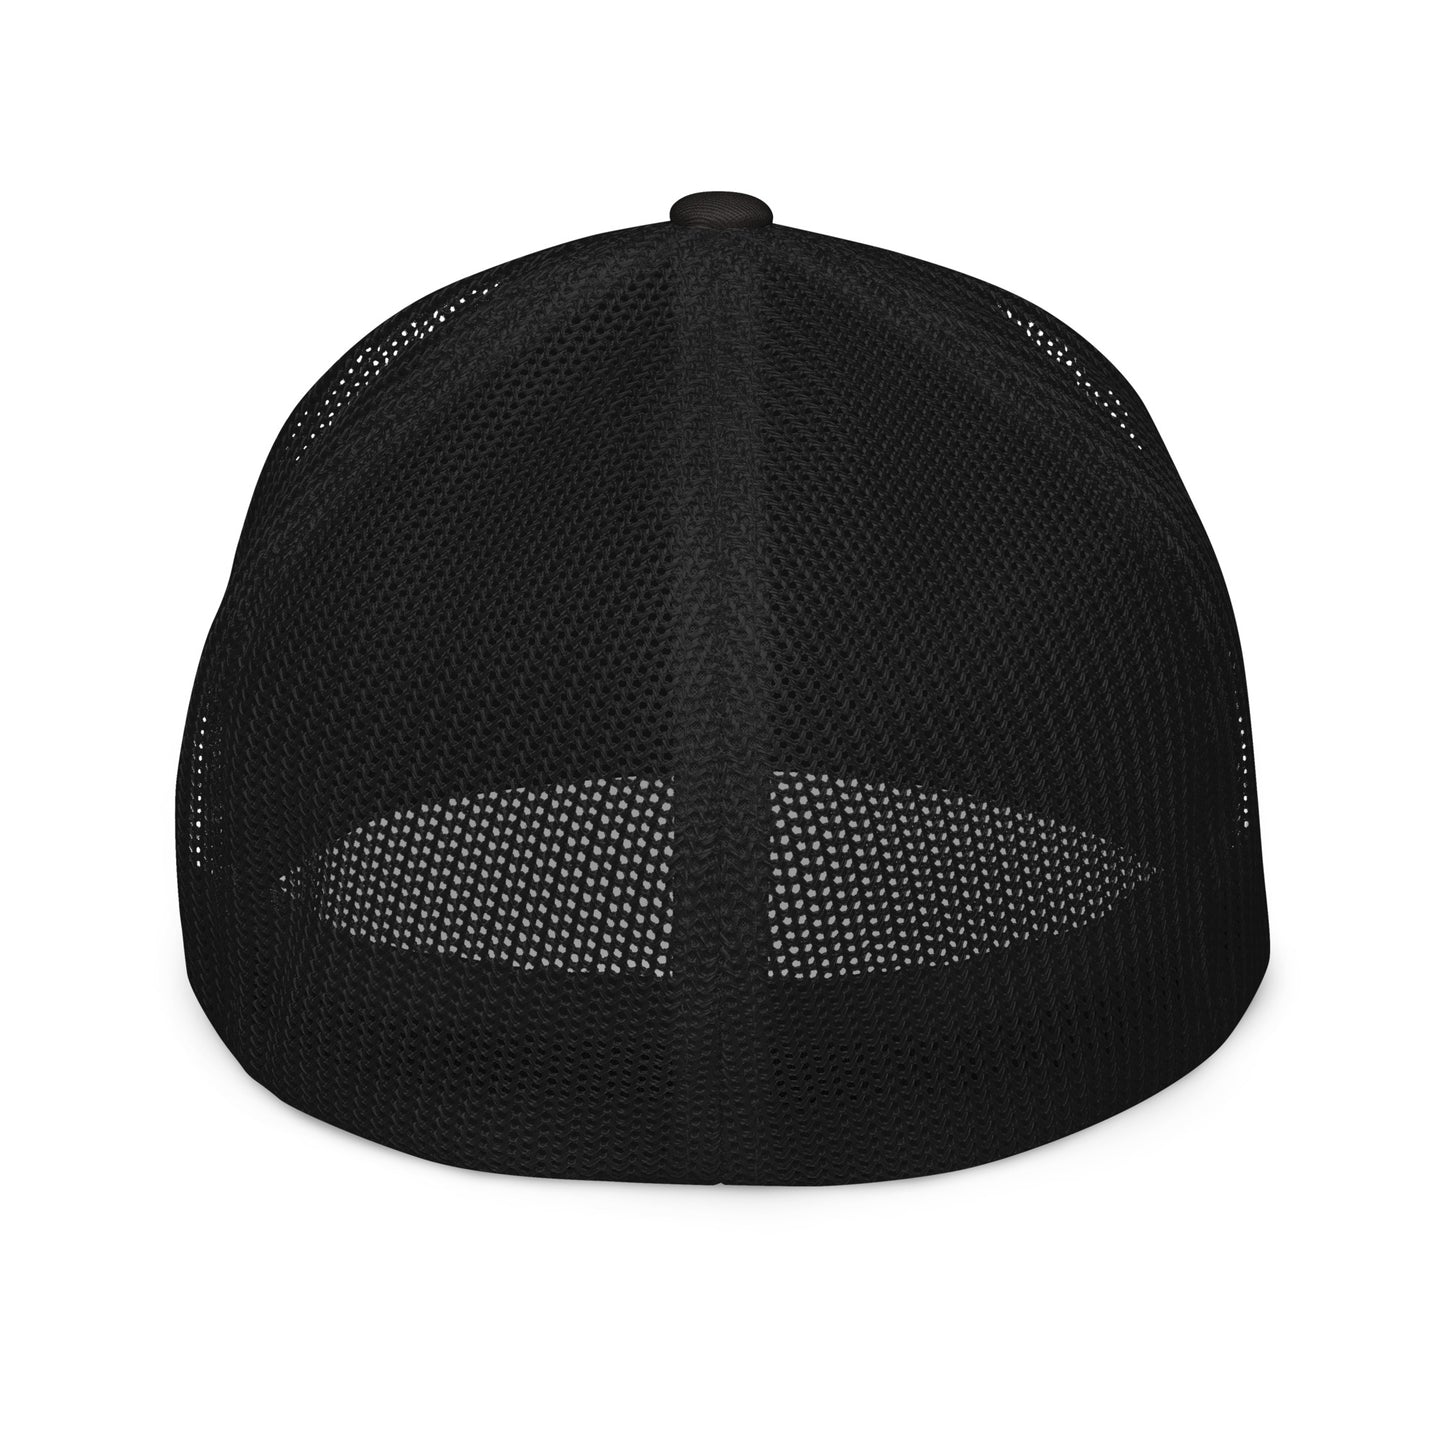 RISE AND GRIND FLEX FIT CURVED BILL HAT